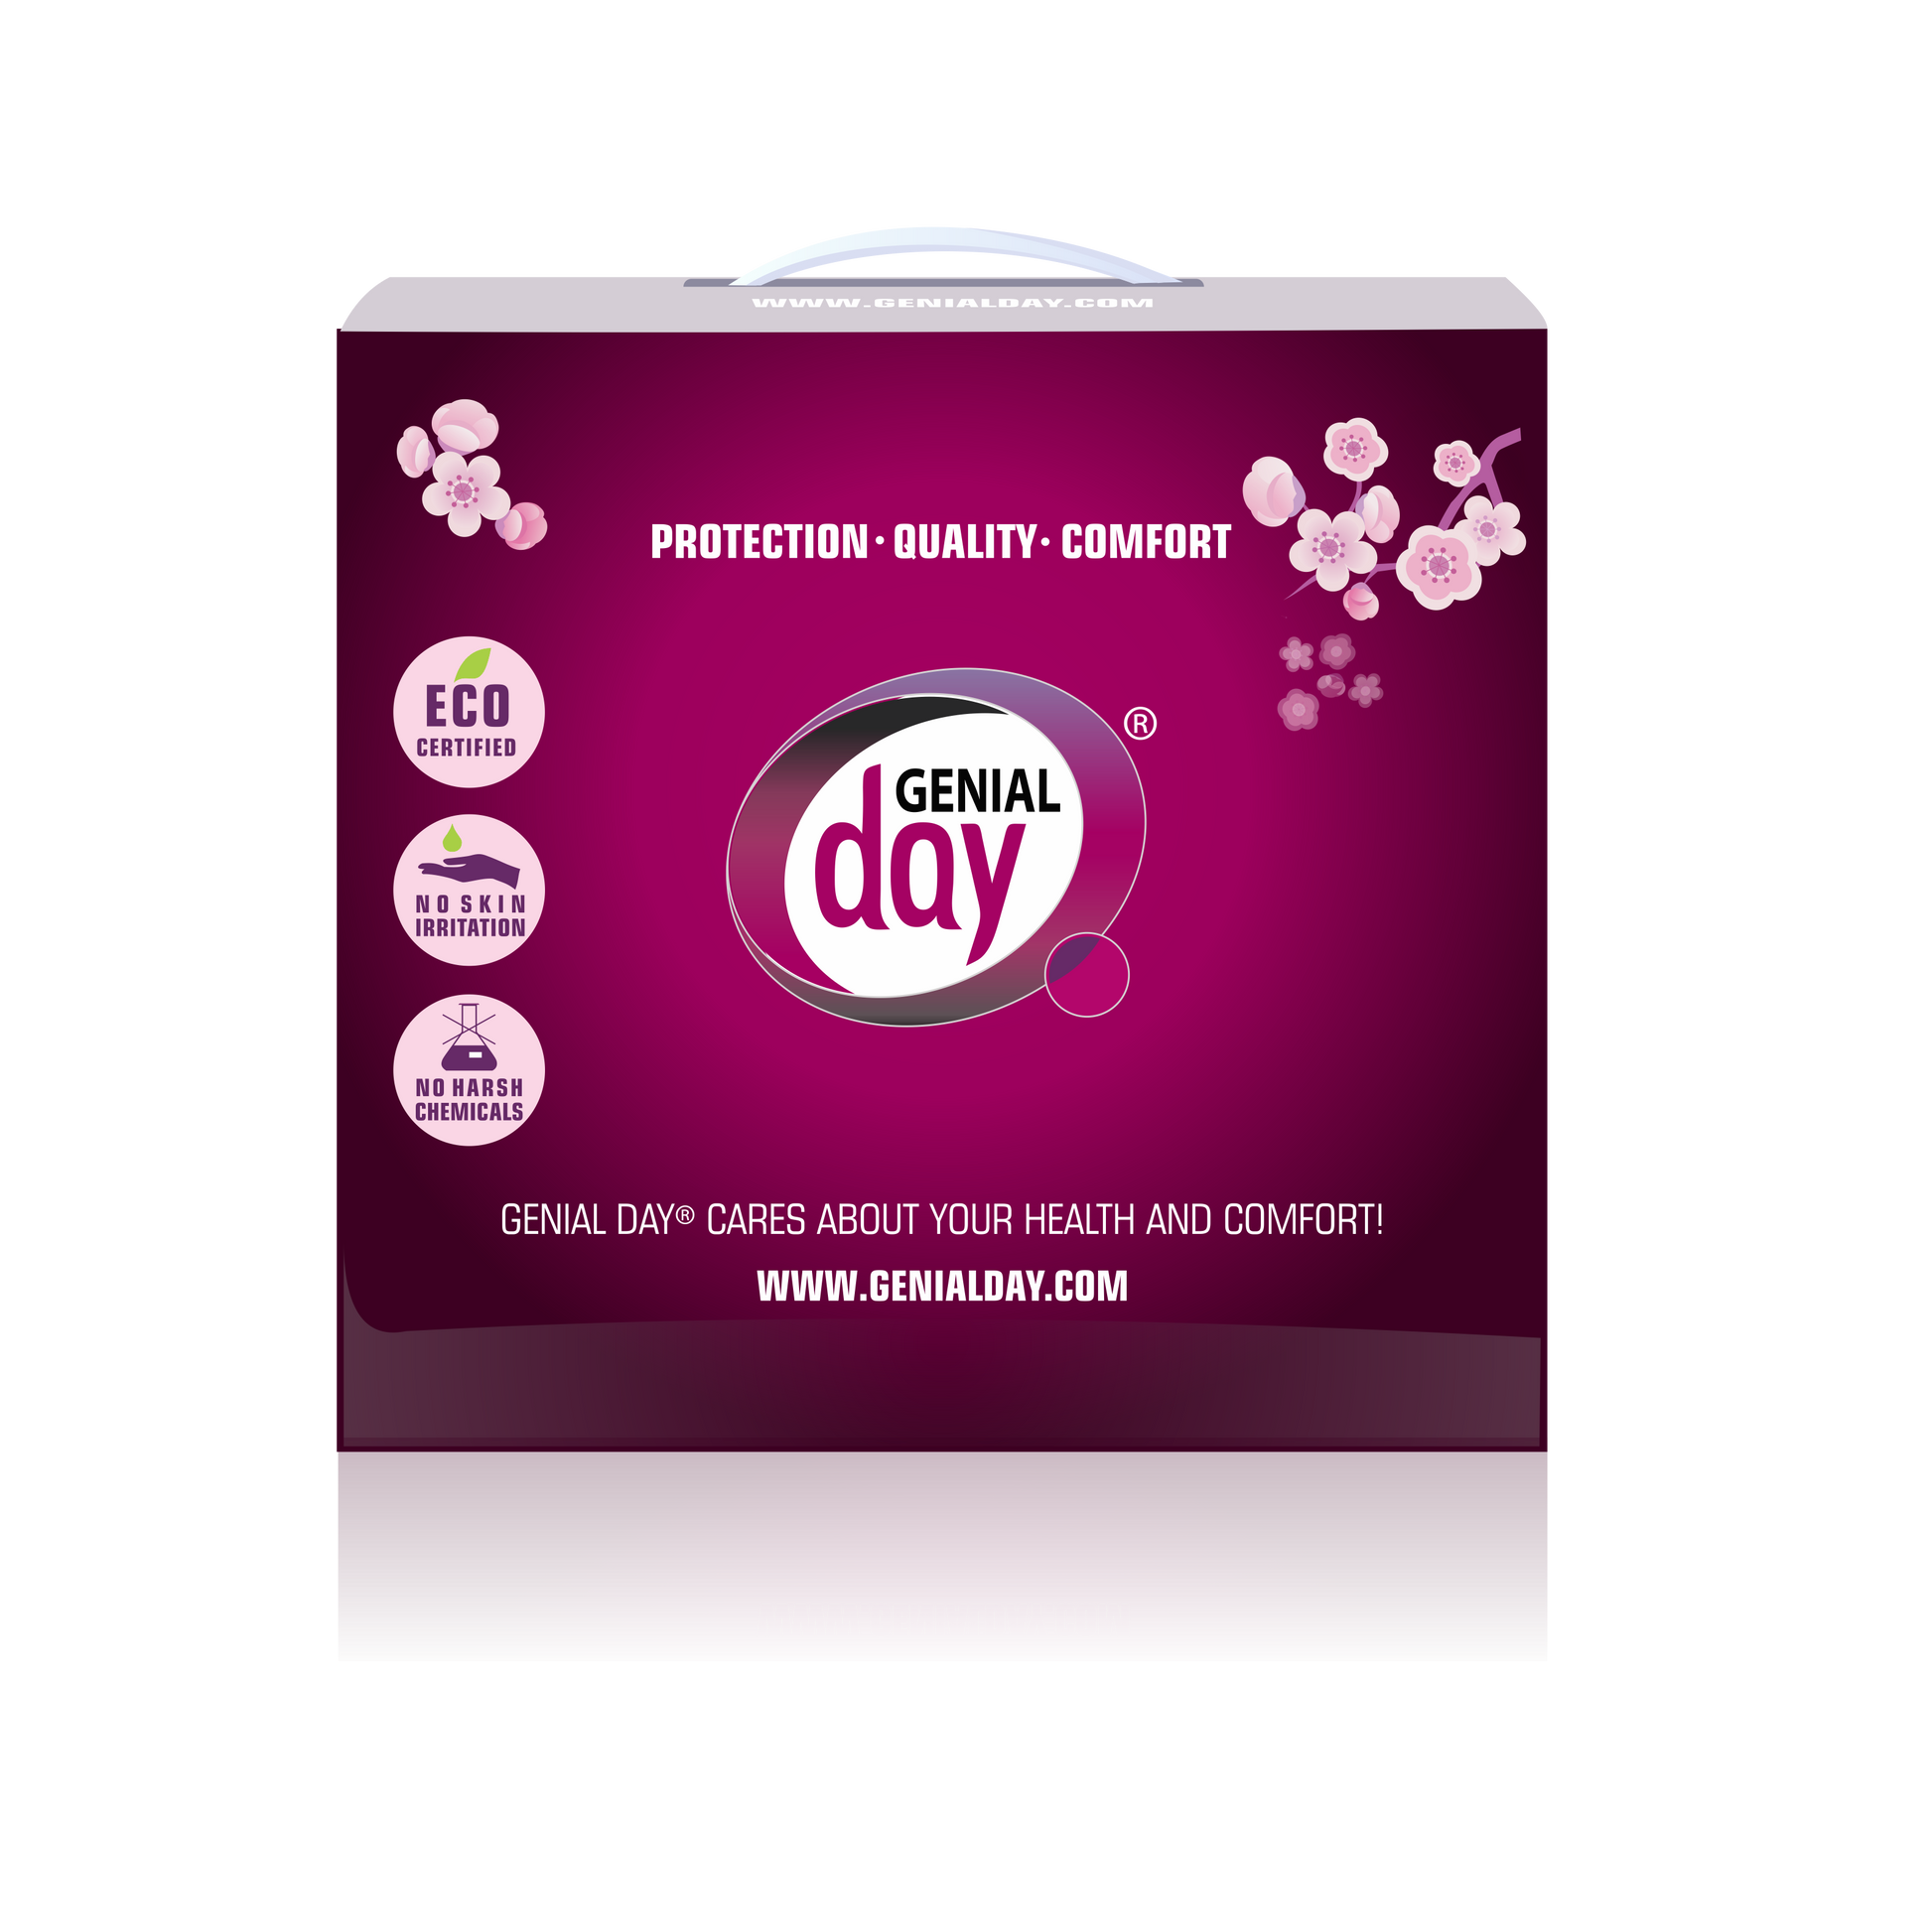 Genial Day, Period Kit, Sanitary pads, eco-certified pads, super absorbent pads, period kit box, box